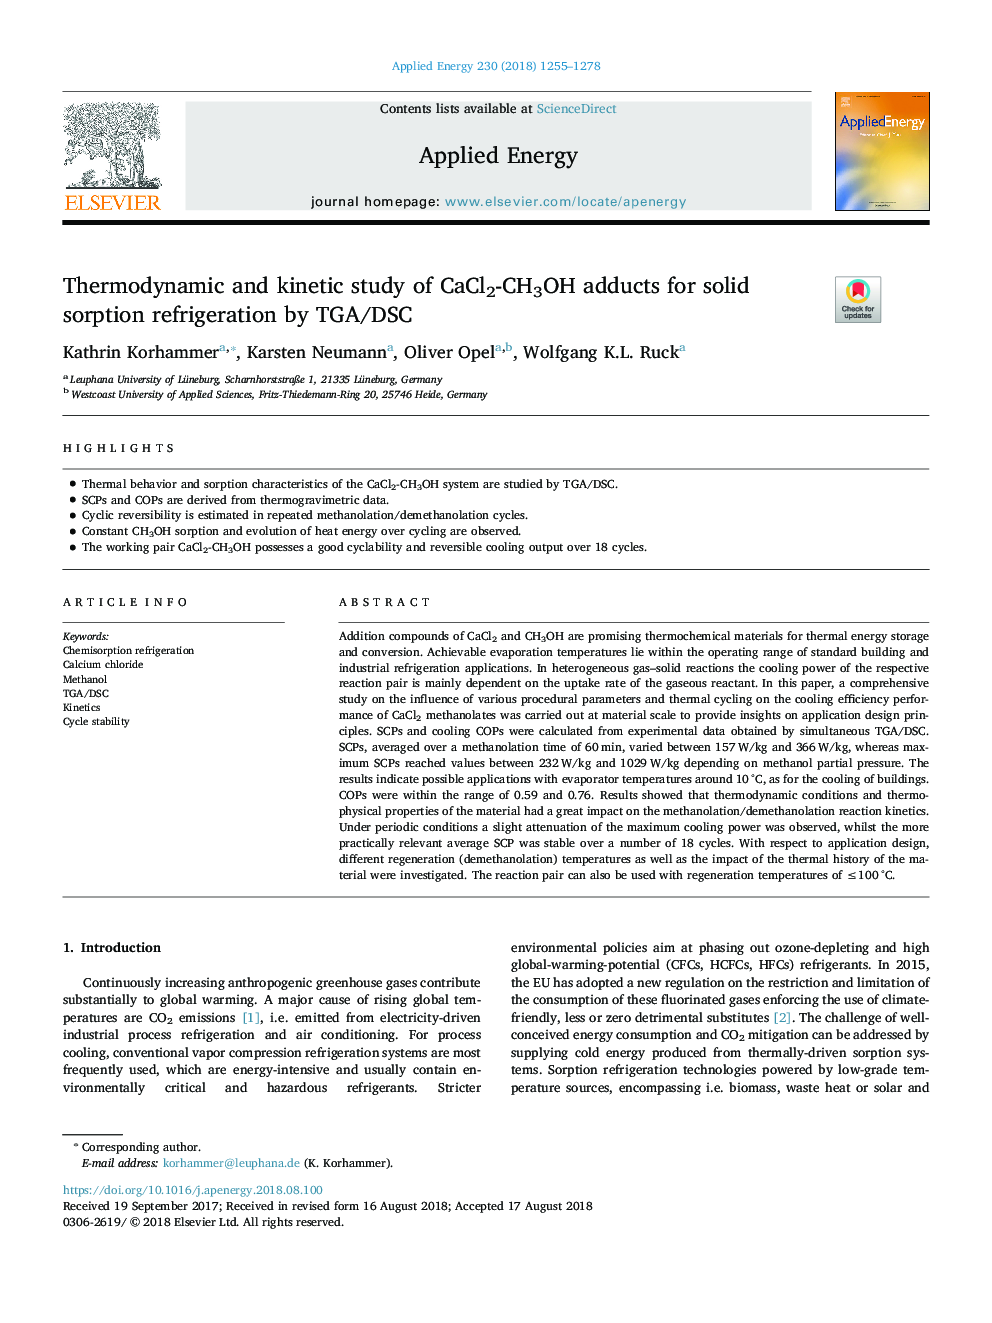 Thermodynamic and kinetic study of CaCl2-CH3OH adducts for solid sorption refrigeration by TGA/DSC